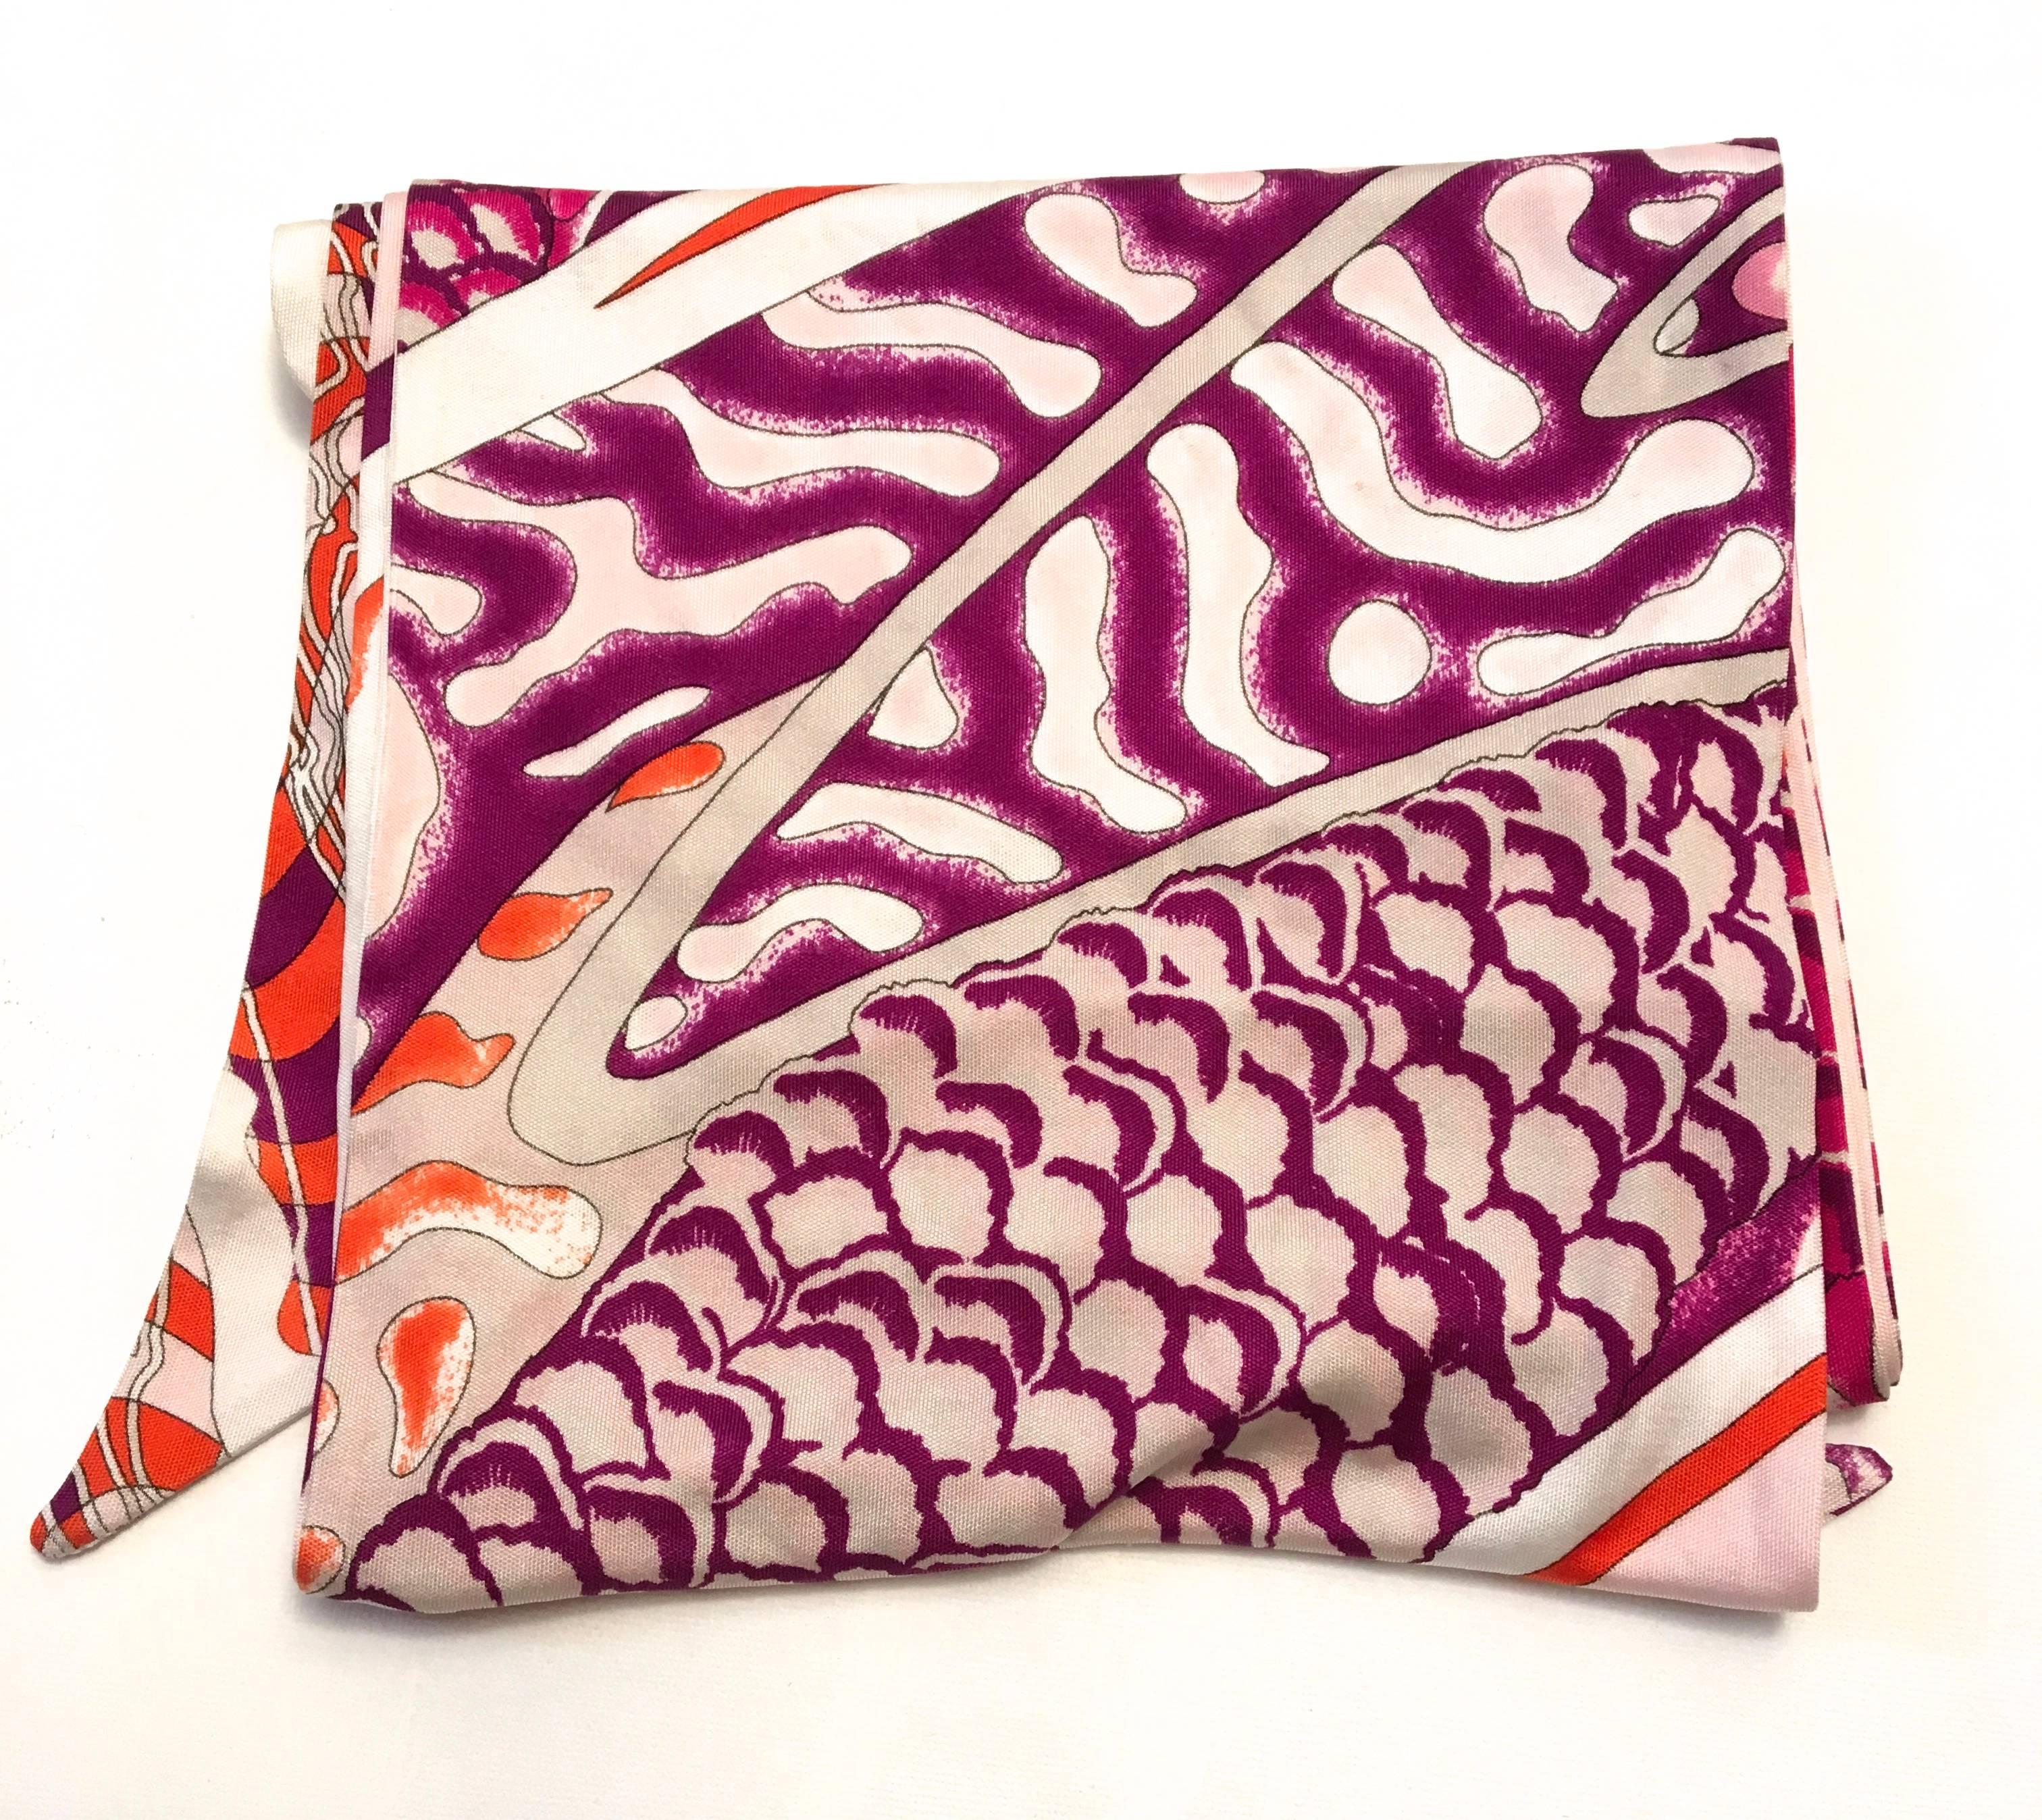 Presented here is a beautiful scarf from Emilio Pucci. The scarf is made of a silk jersey material that has a bit of stretch to it. The pattern is a fish scale Koi pattern and is comprised of white, magenta, lavender, purple, and orange in the